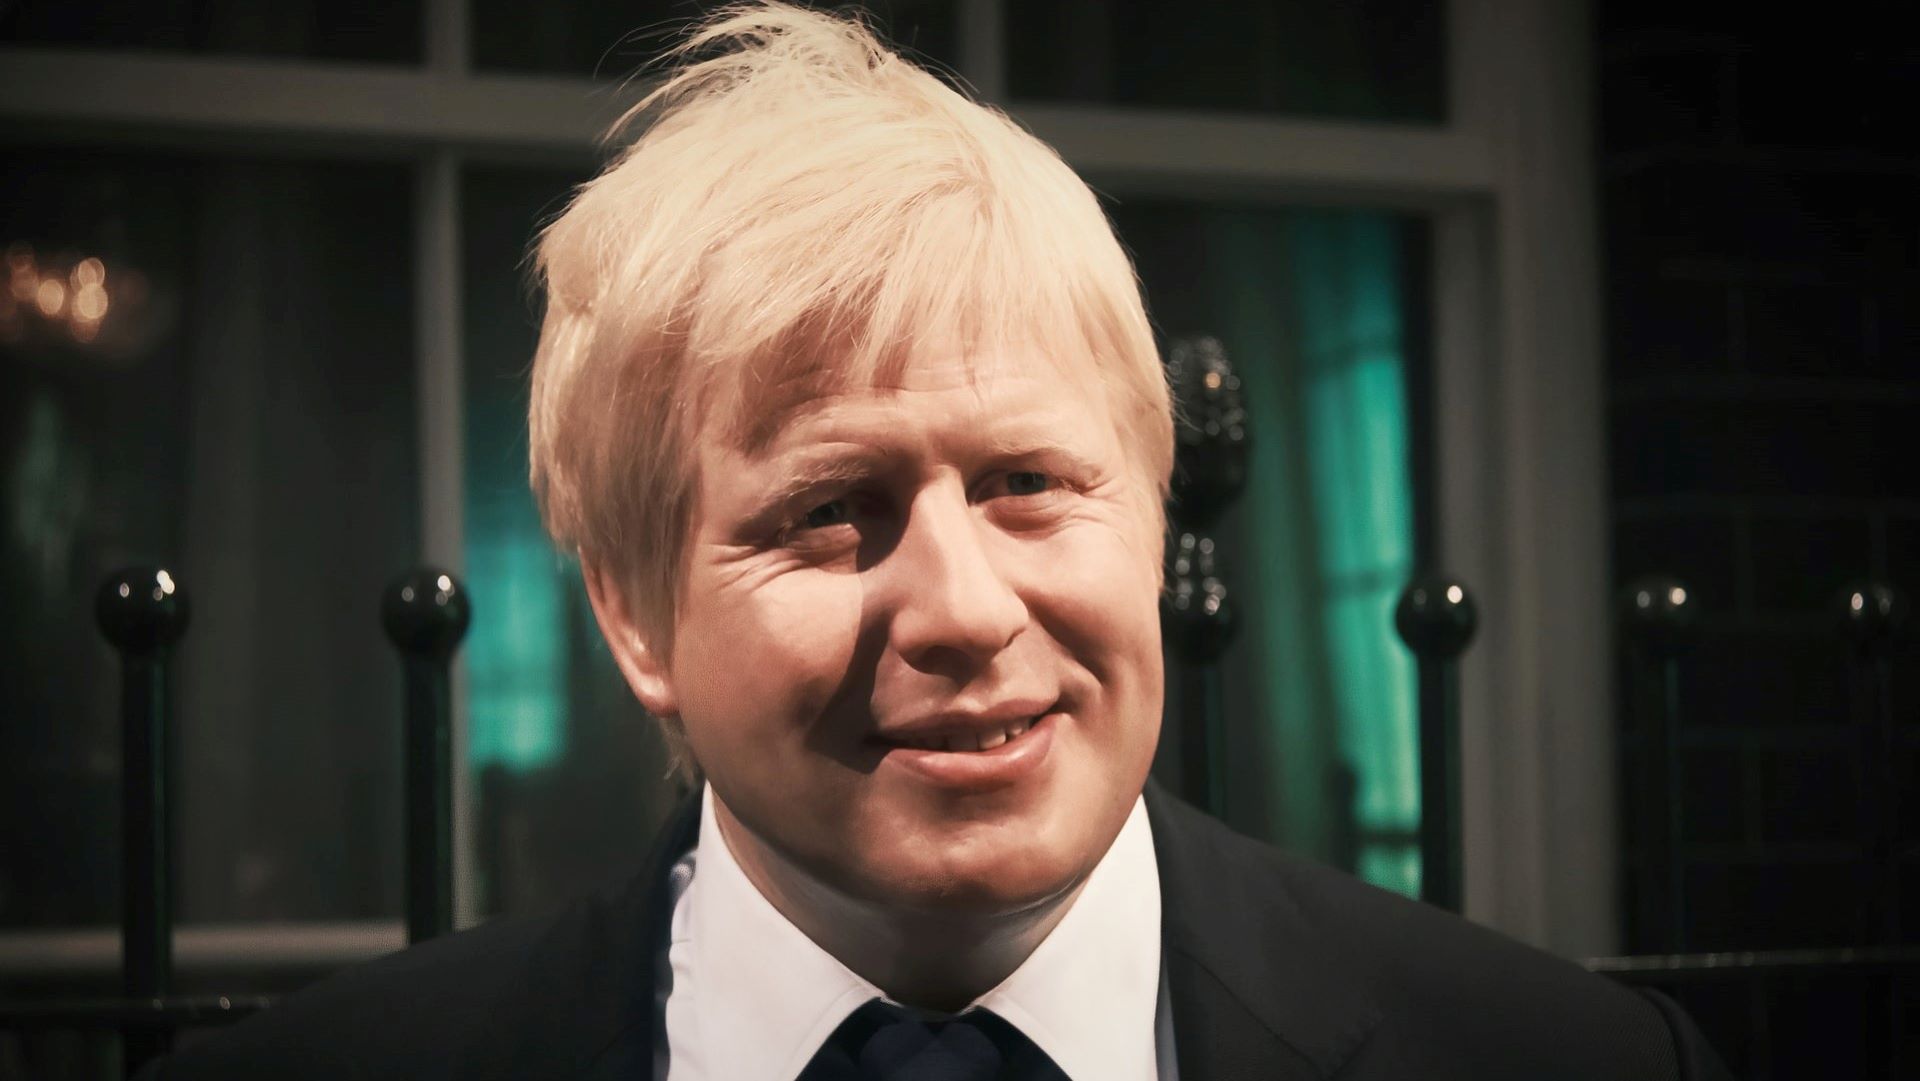 There's a reason why Partygate, involving senior British politicians such as PM Boris Johnson, hits a particularly raw nerve with the public